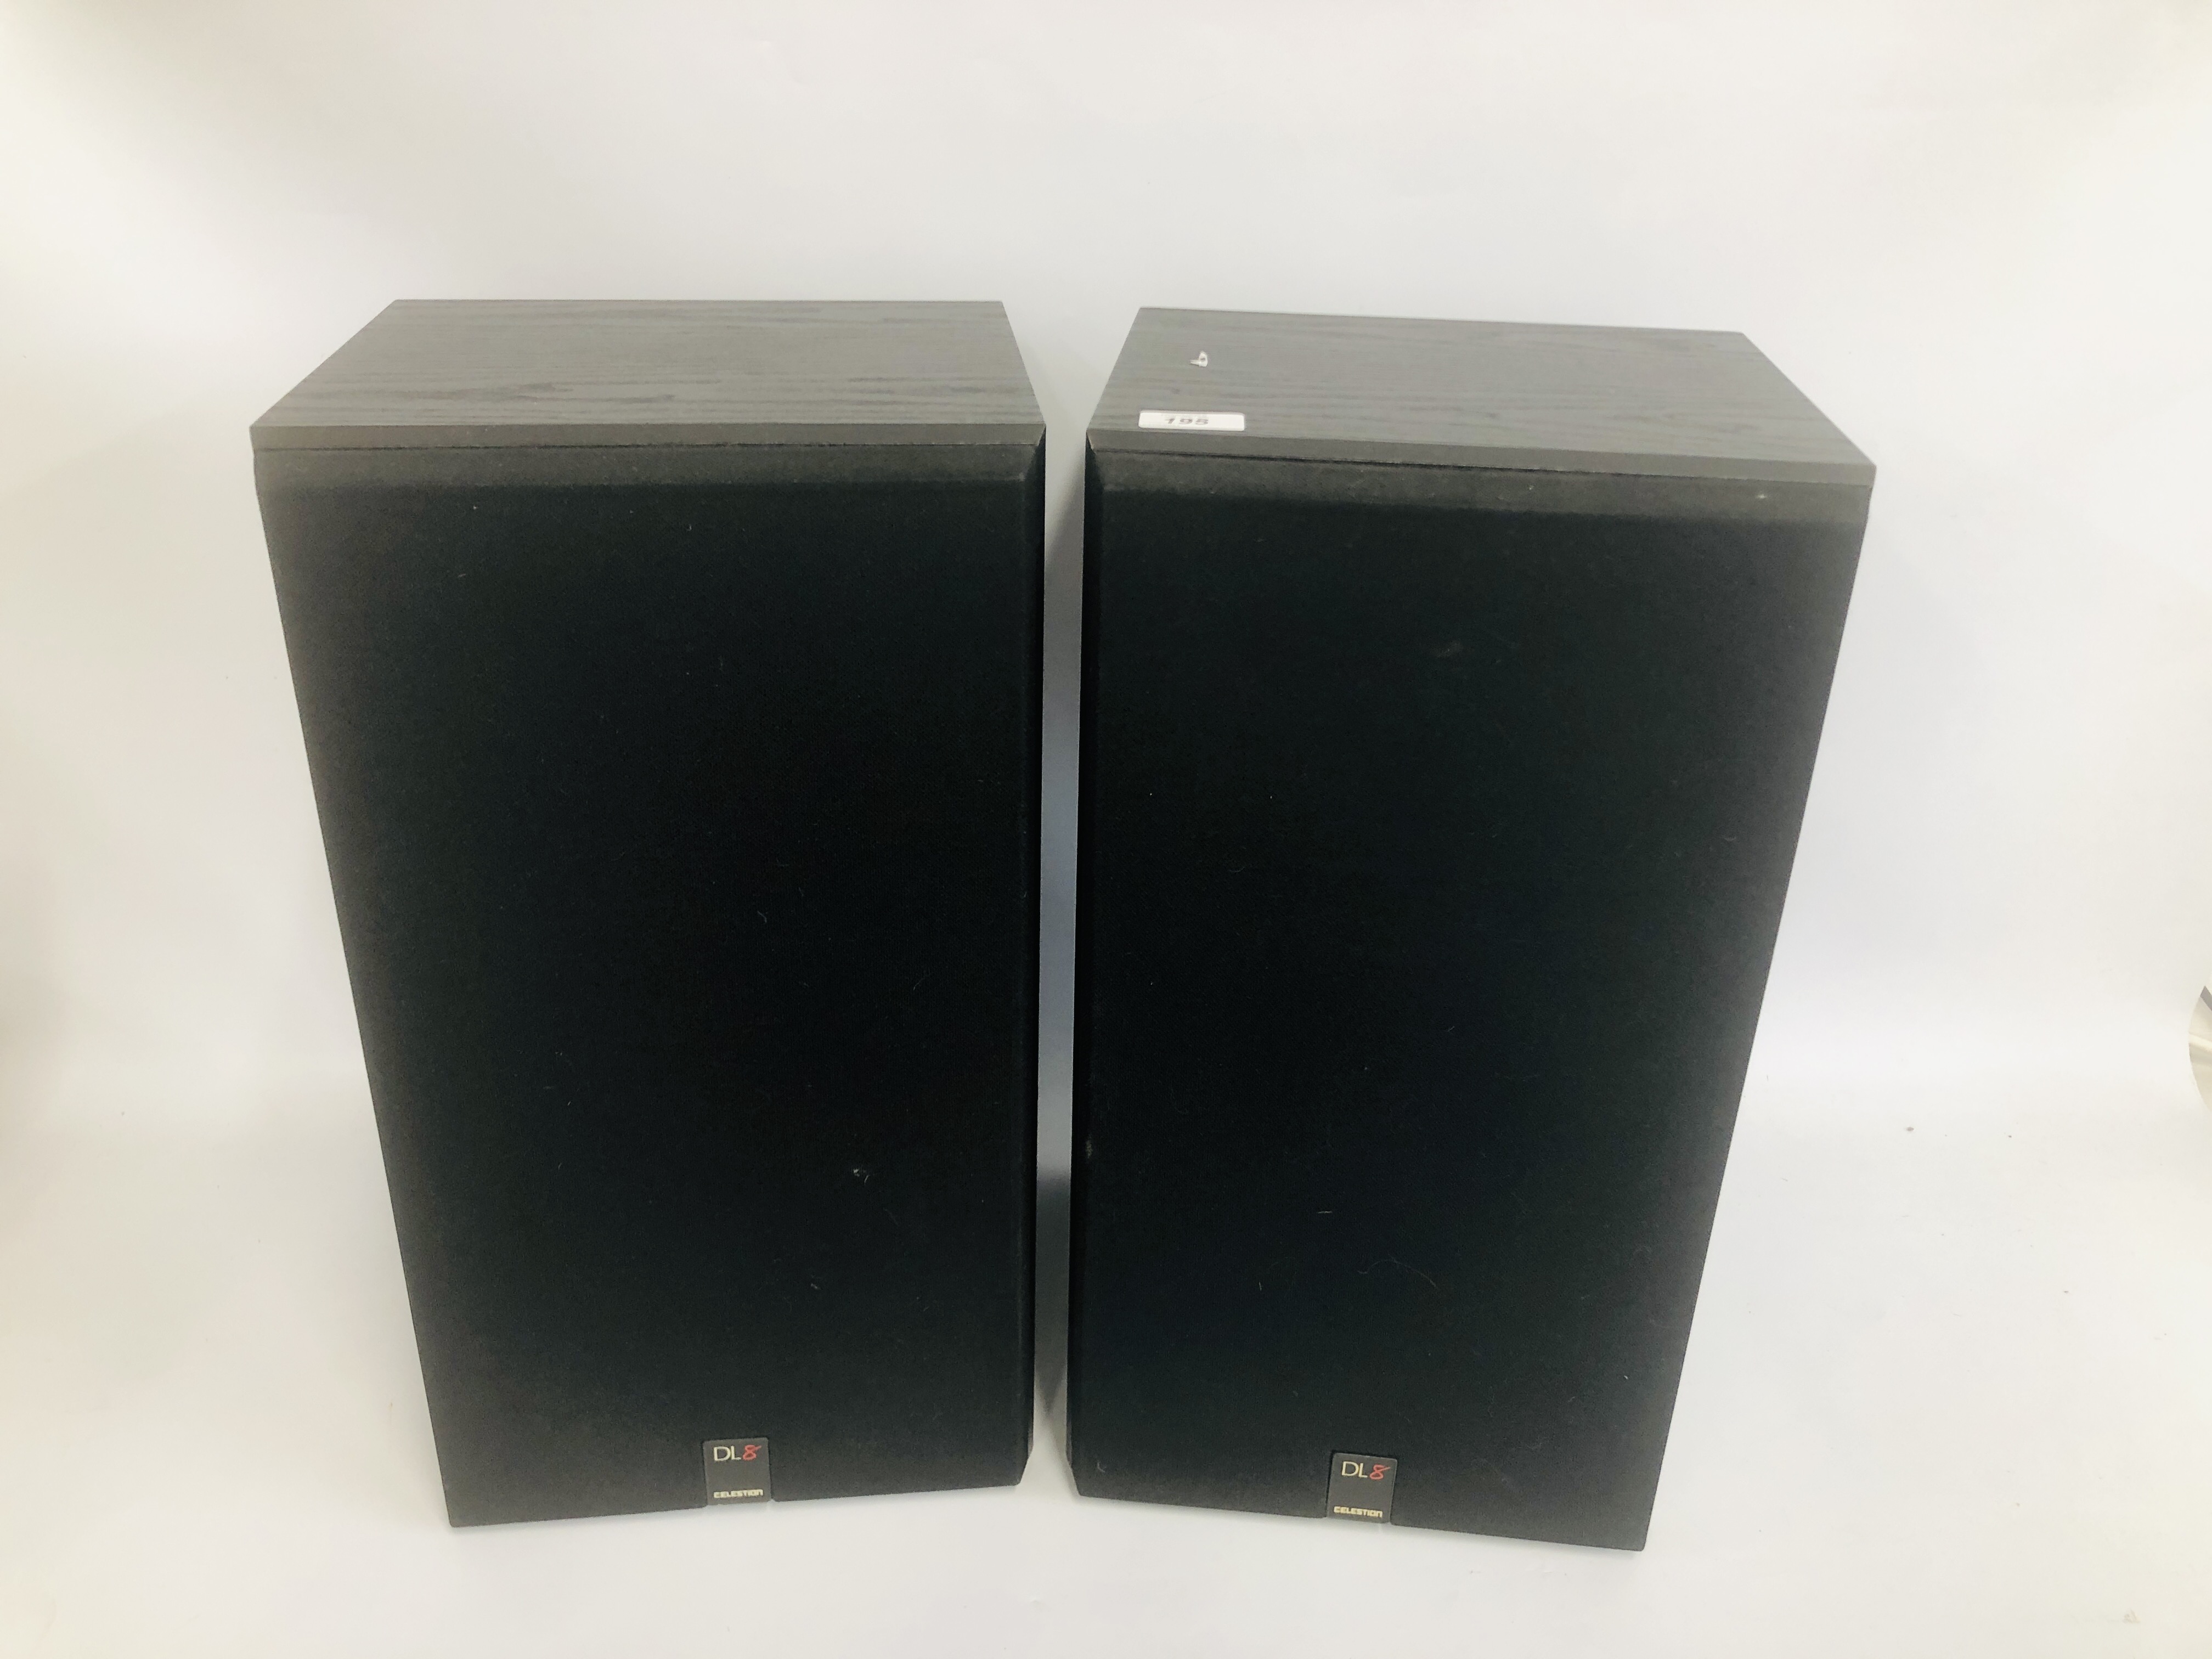 PAIR OF CELESTRON DL8 LOUDSPEAKERS (BLACK ASH FINISH CABINETS) - SOLD AS SEEN - Image 2 of 5